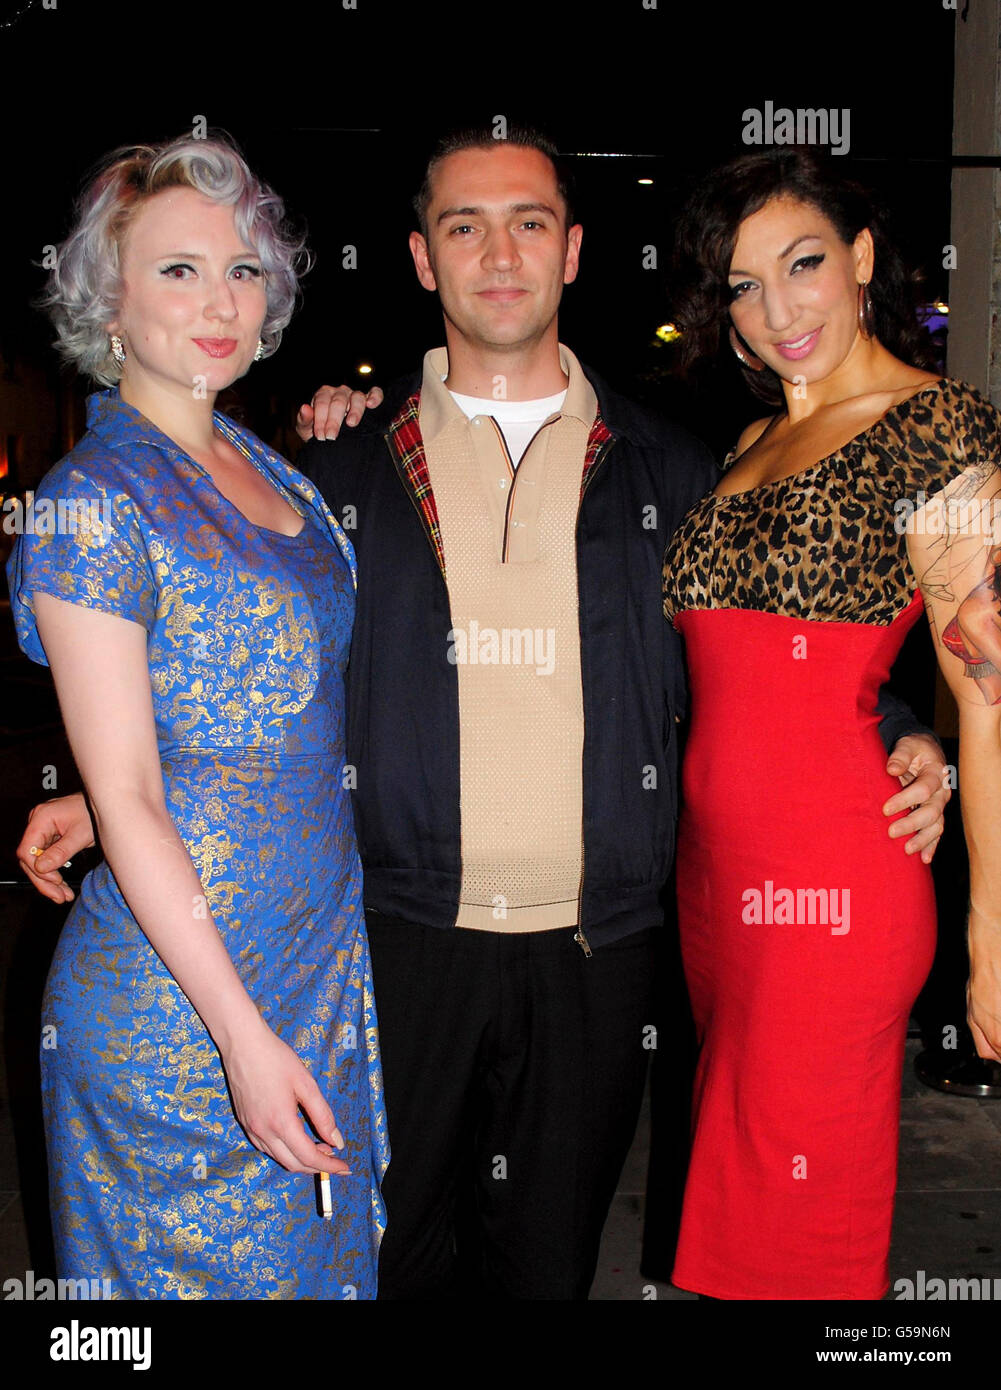 Reg Traviss poses with two burlesque dancers at the opening of Rattlesnake Bar, Islington, London. Stock Photo